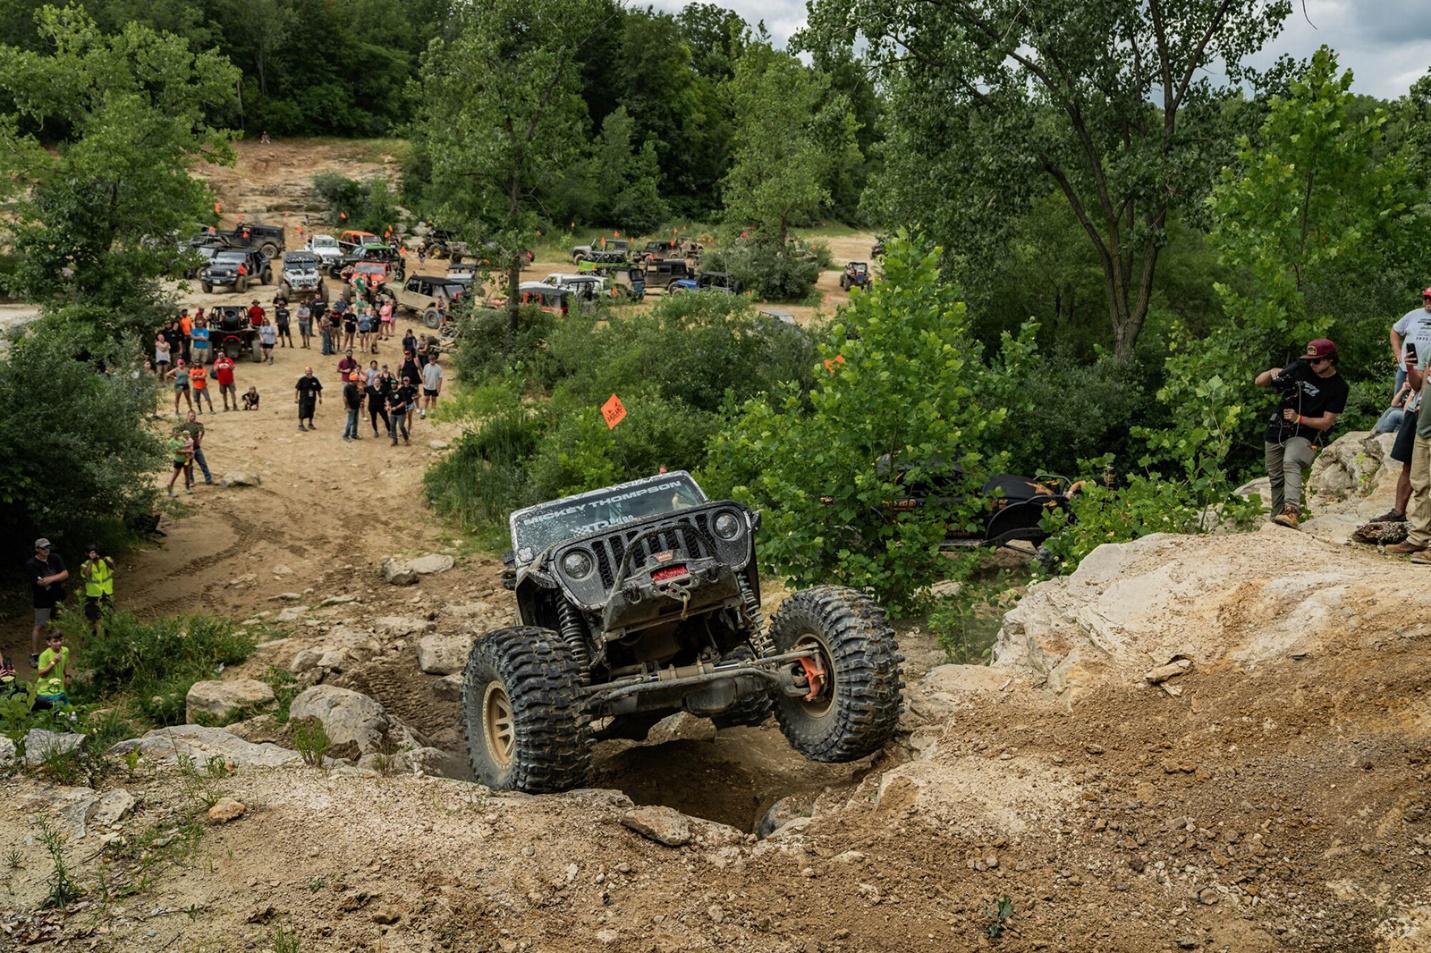 A jeep crawling a rock side at an off-road rally 